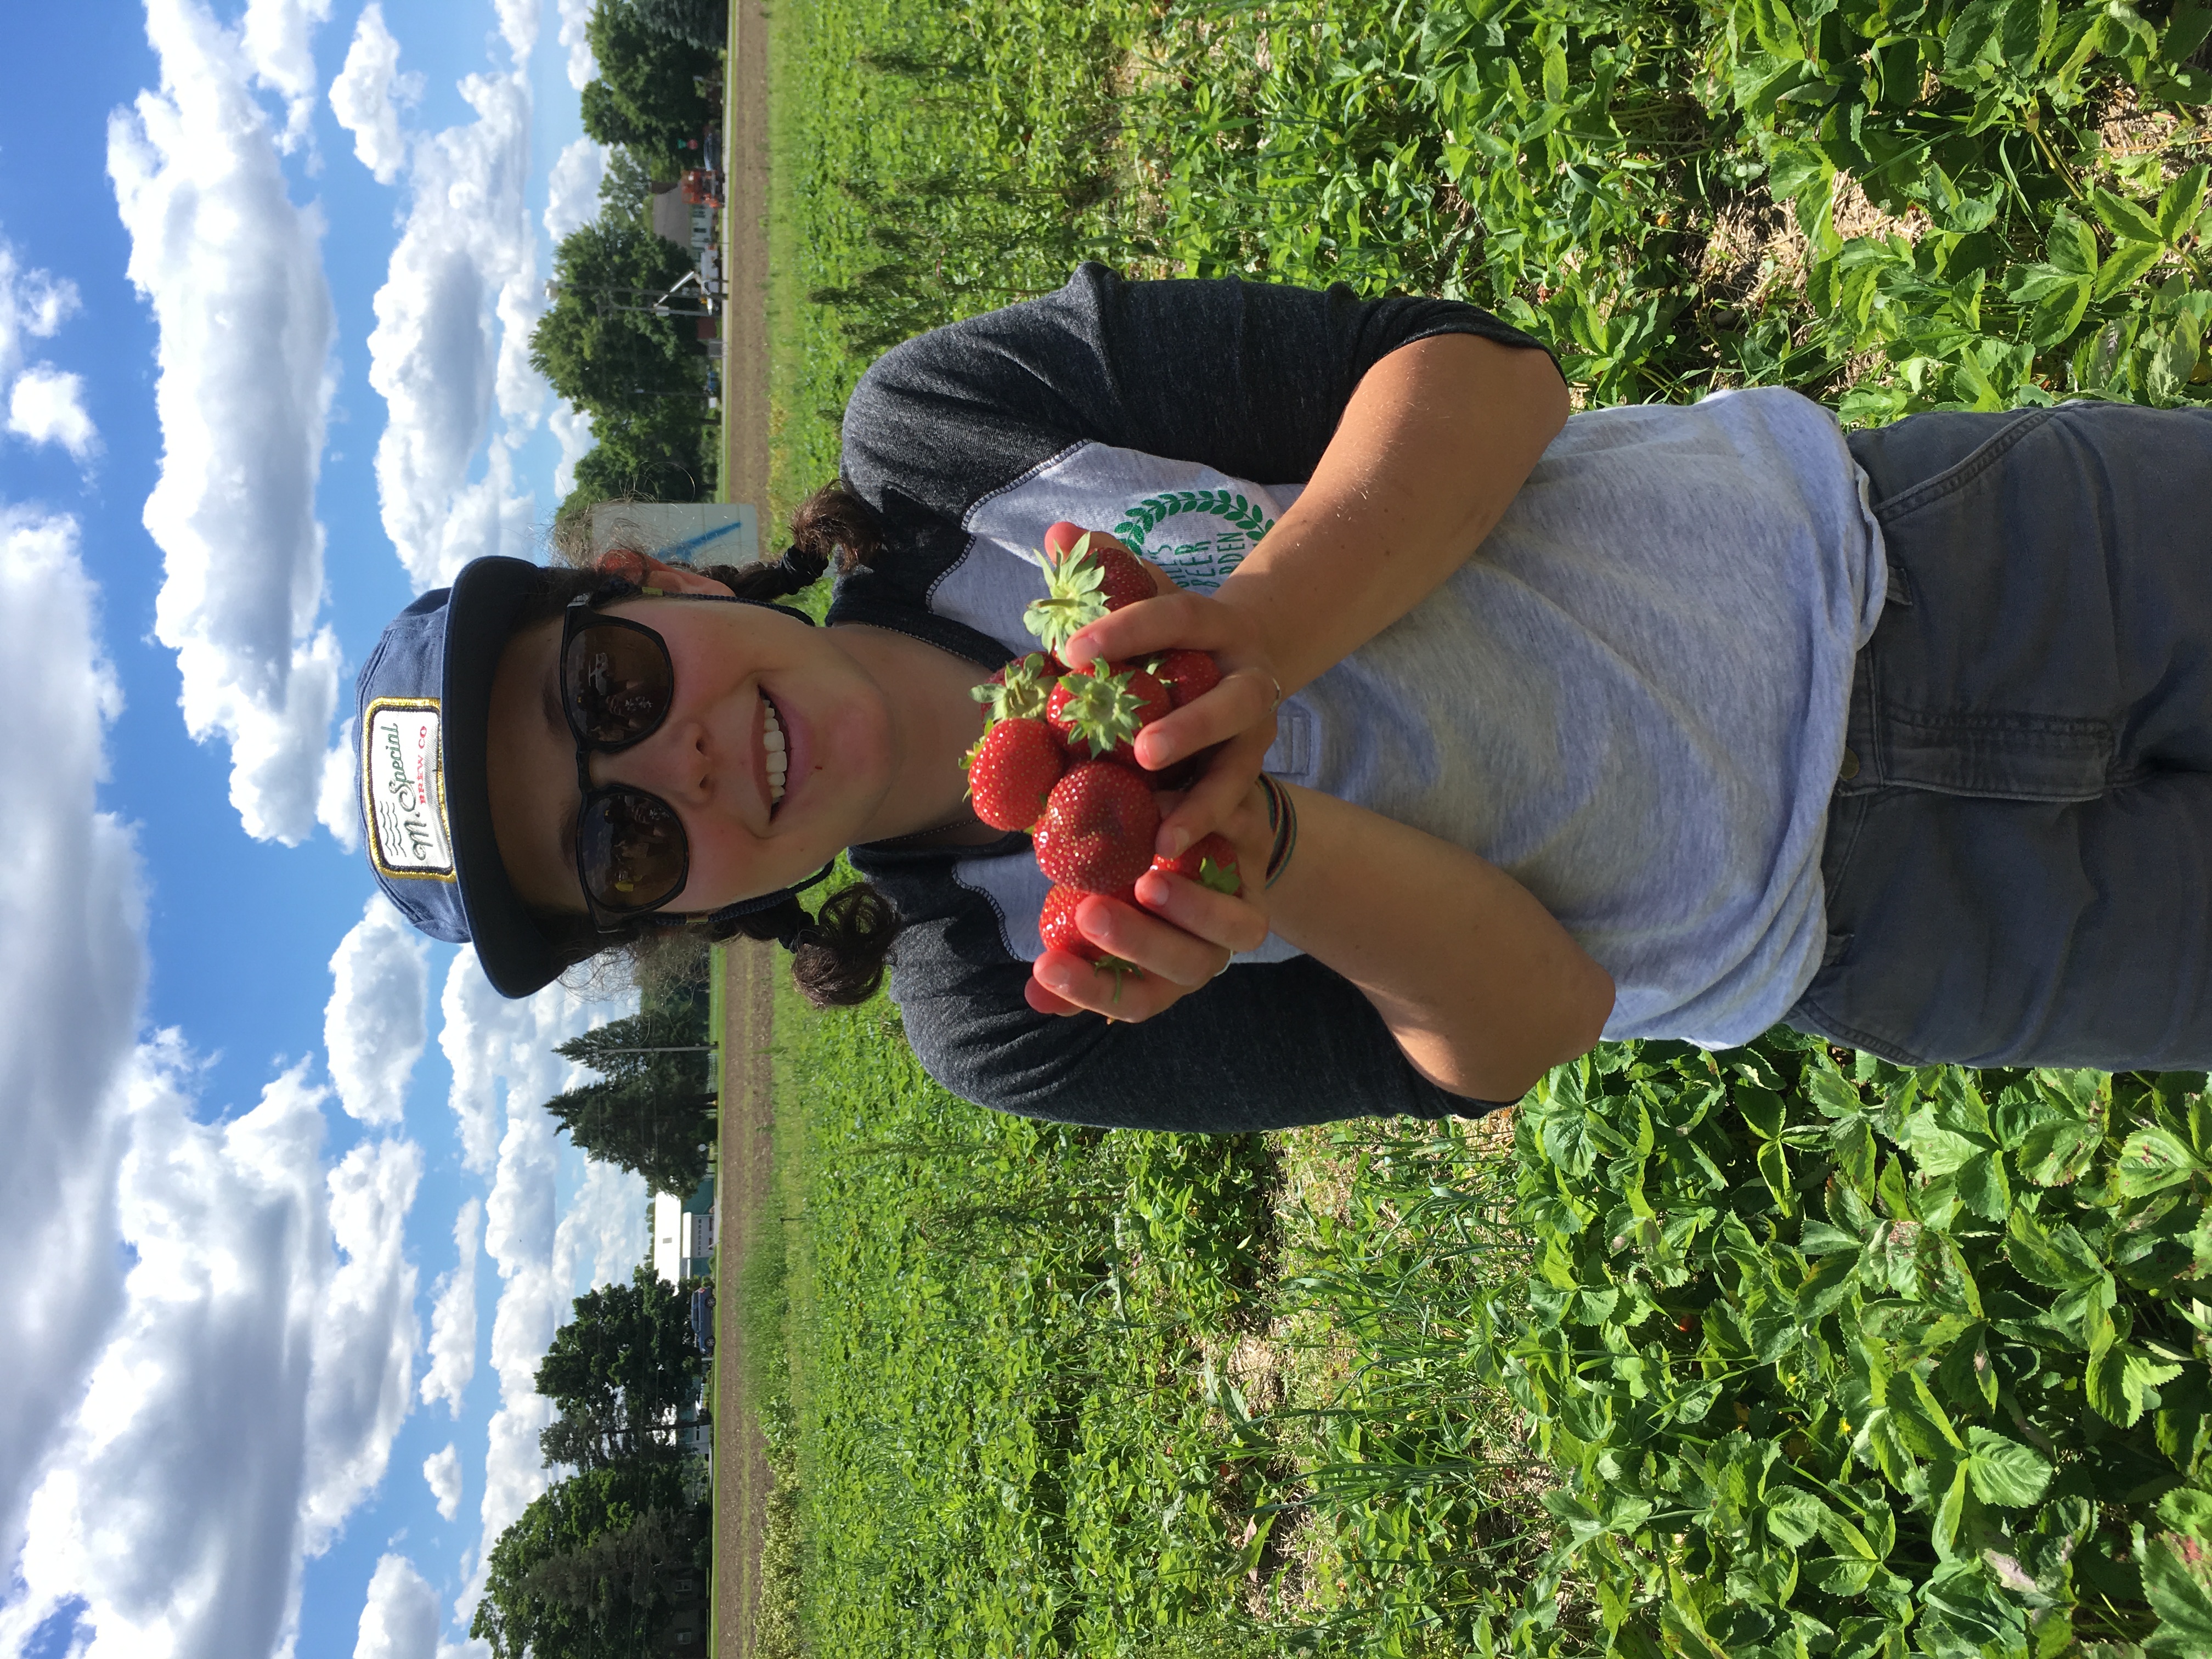 Sarah holding strawberries in a strawberry field